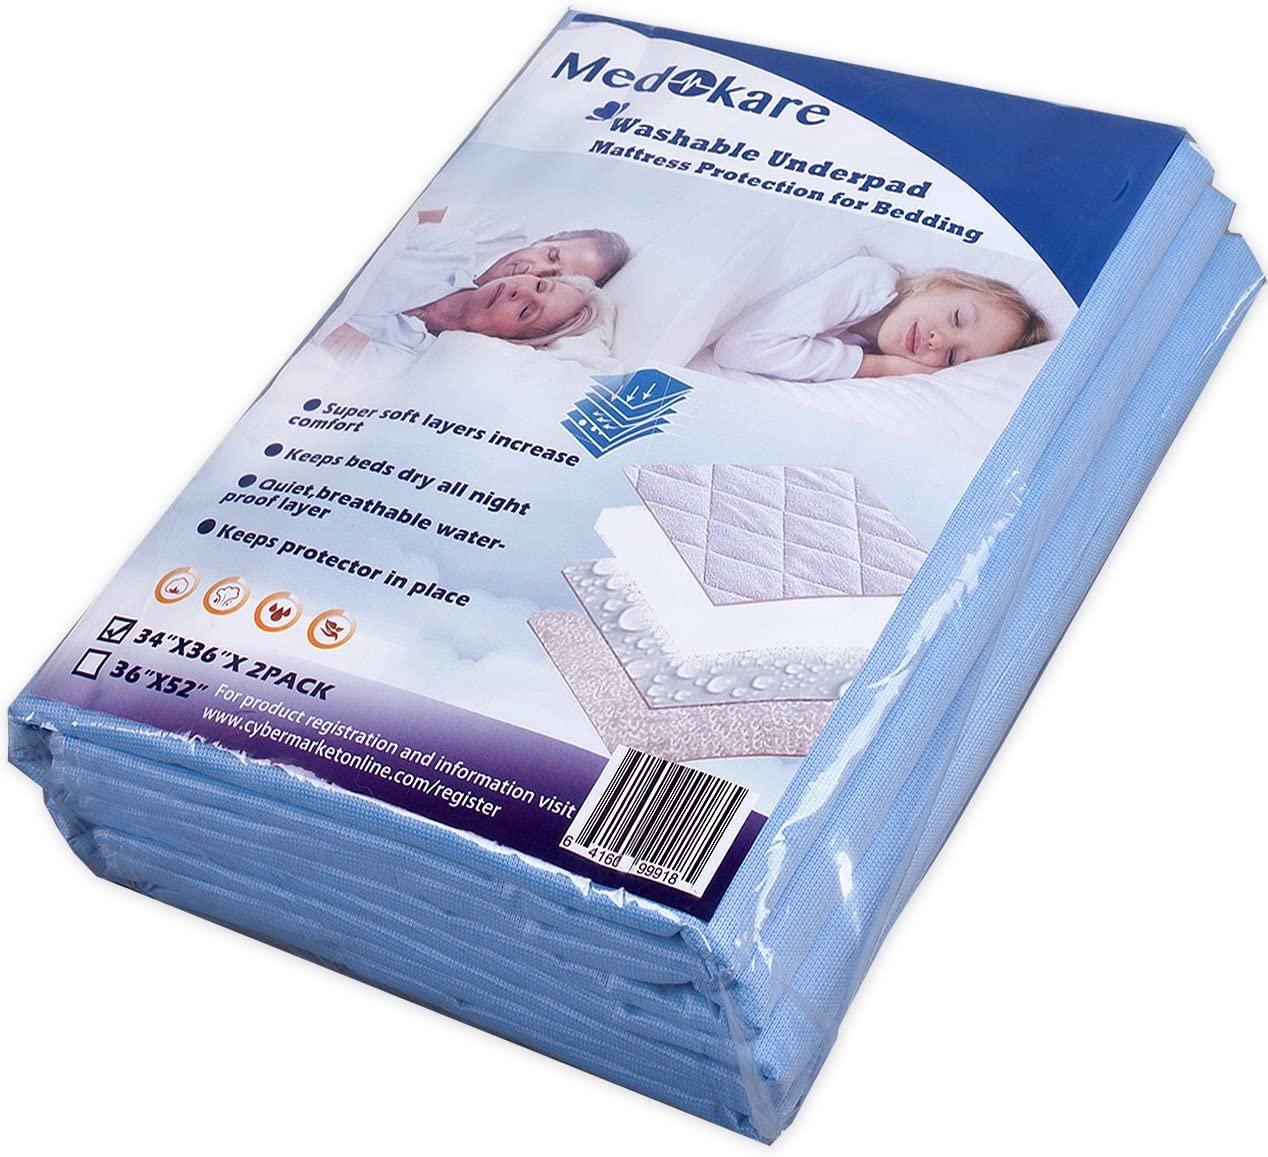 Medokare Bed Pads Bedwetting Underpads 1500ml